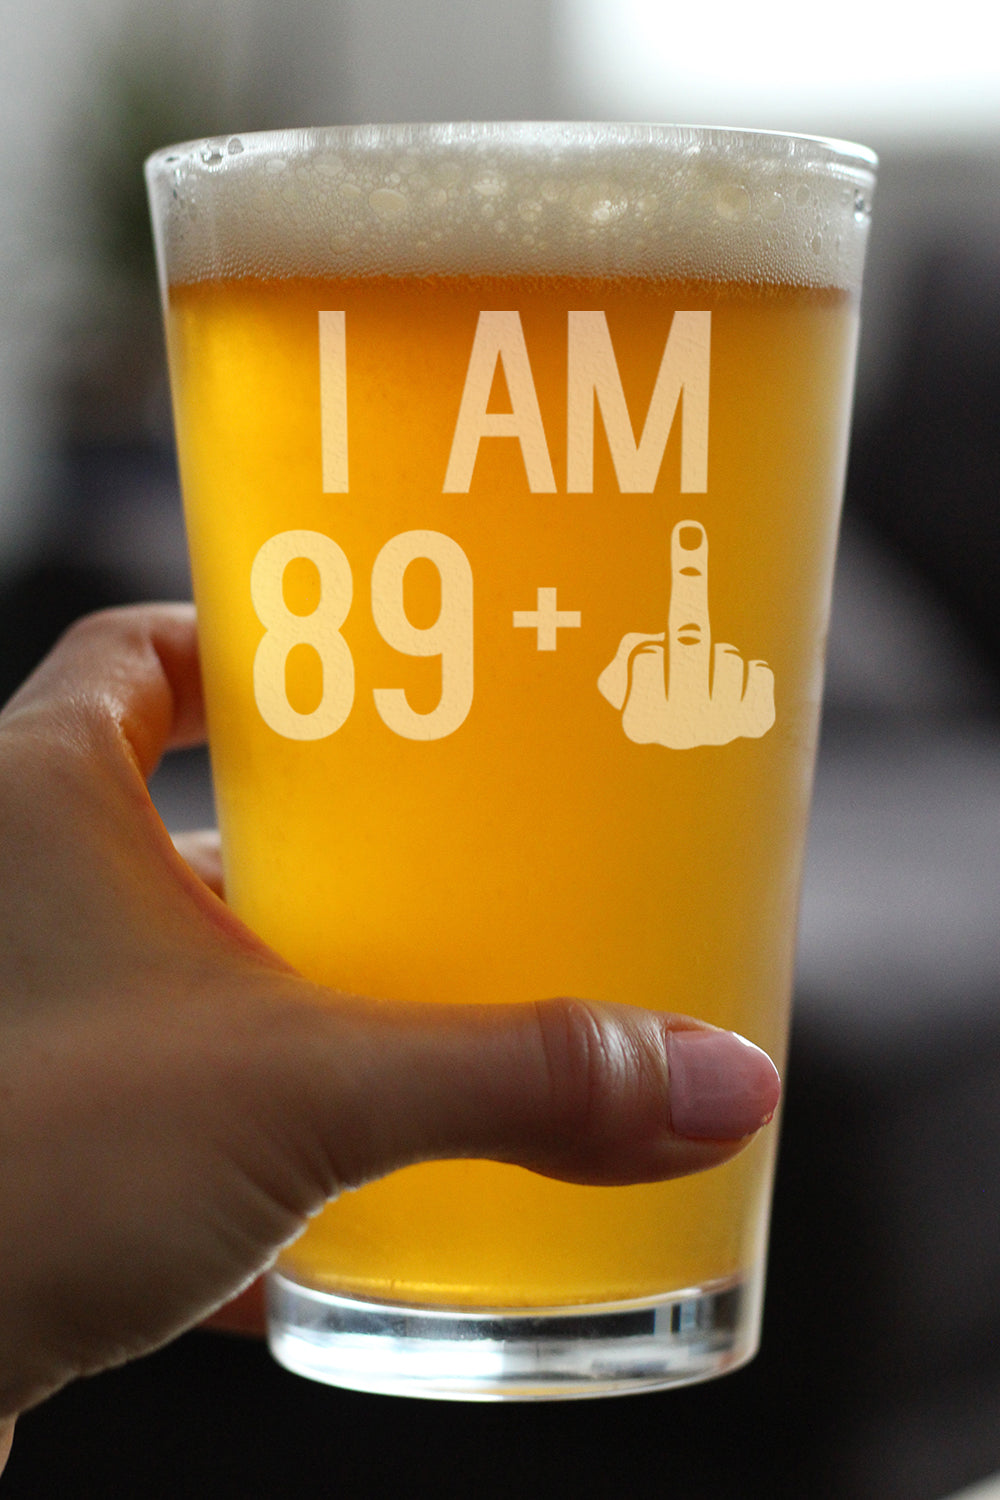 89 + 1 Middle Finger - 16 oz Pint Glass for Beer - Funny 90th Birthday Gifts for Men or Women Turning 90